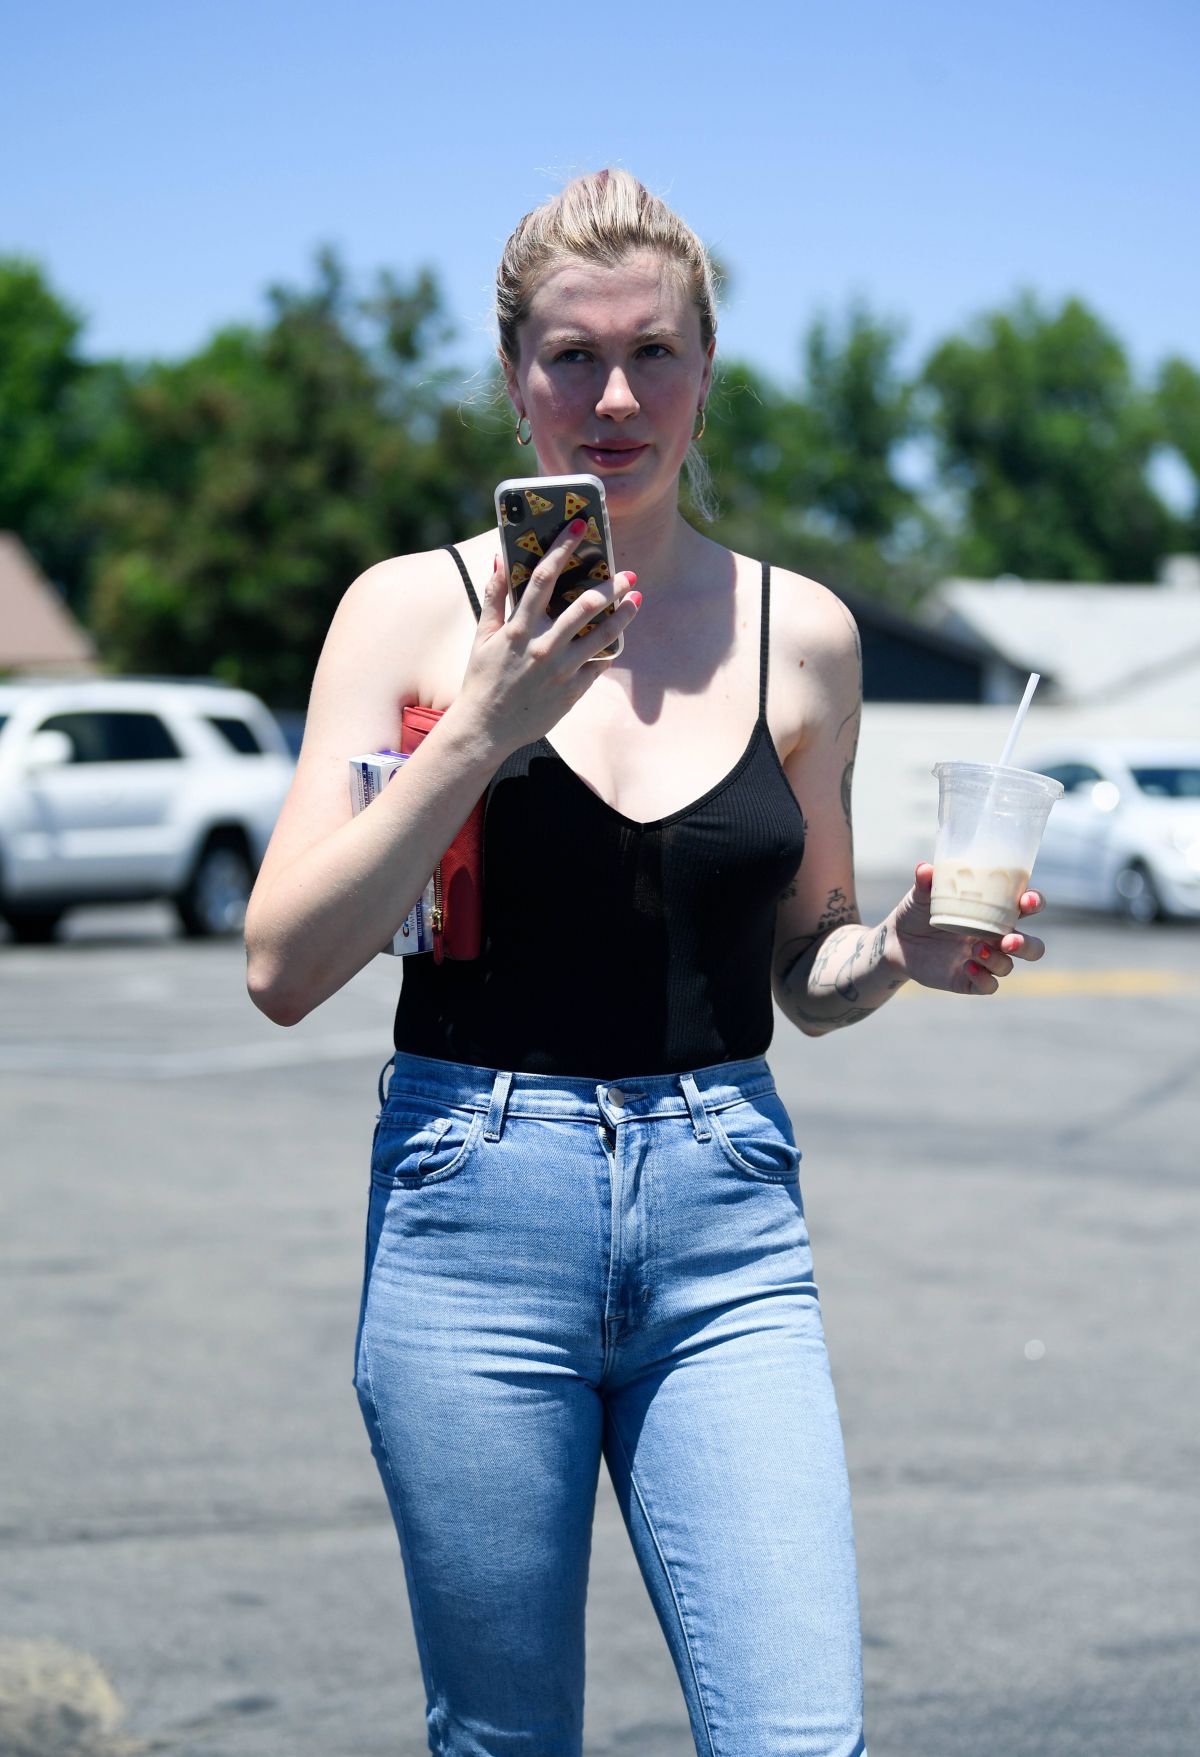 IRELAND BALDWIN Out and About in Los Angeles 07/11/2019 – HawtCelebs